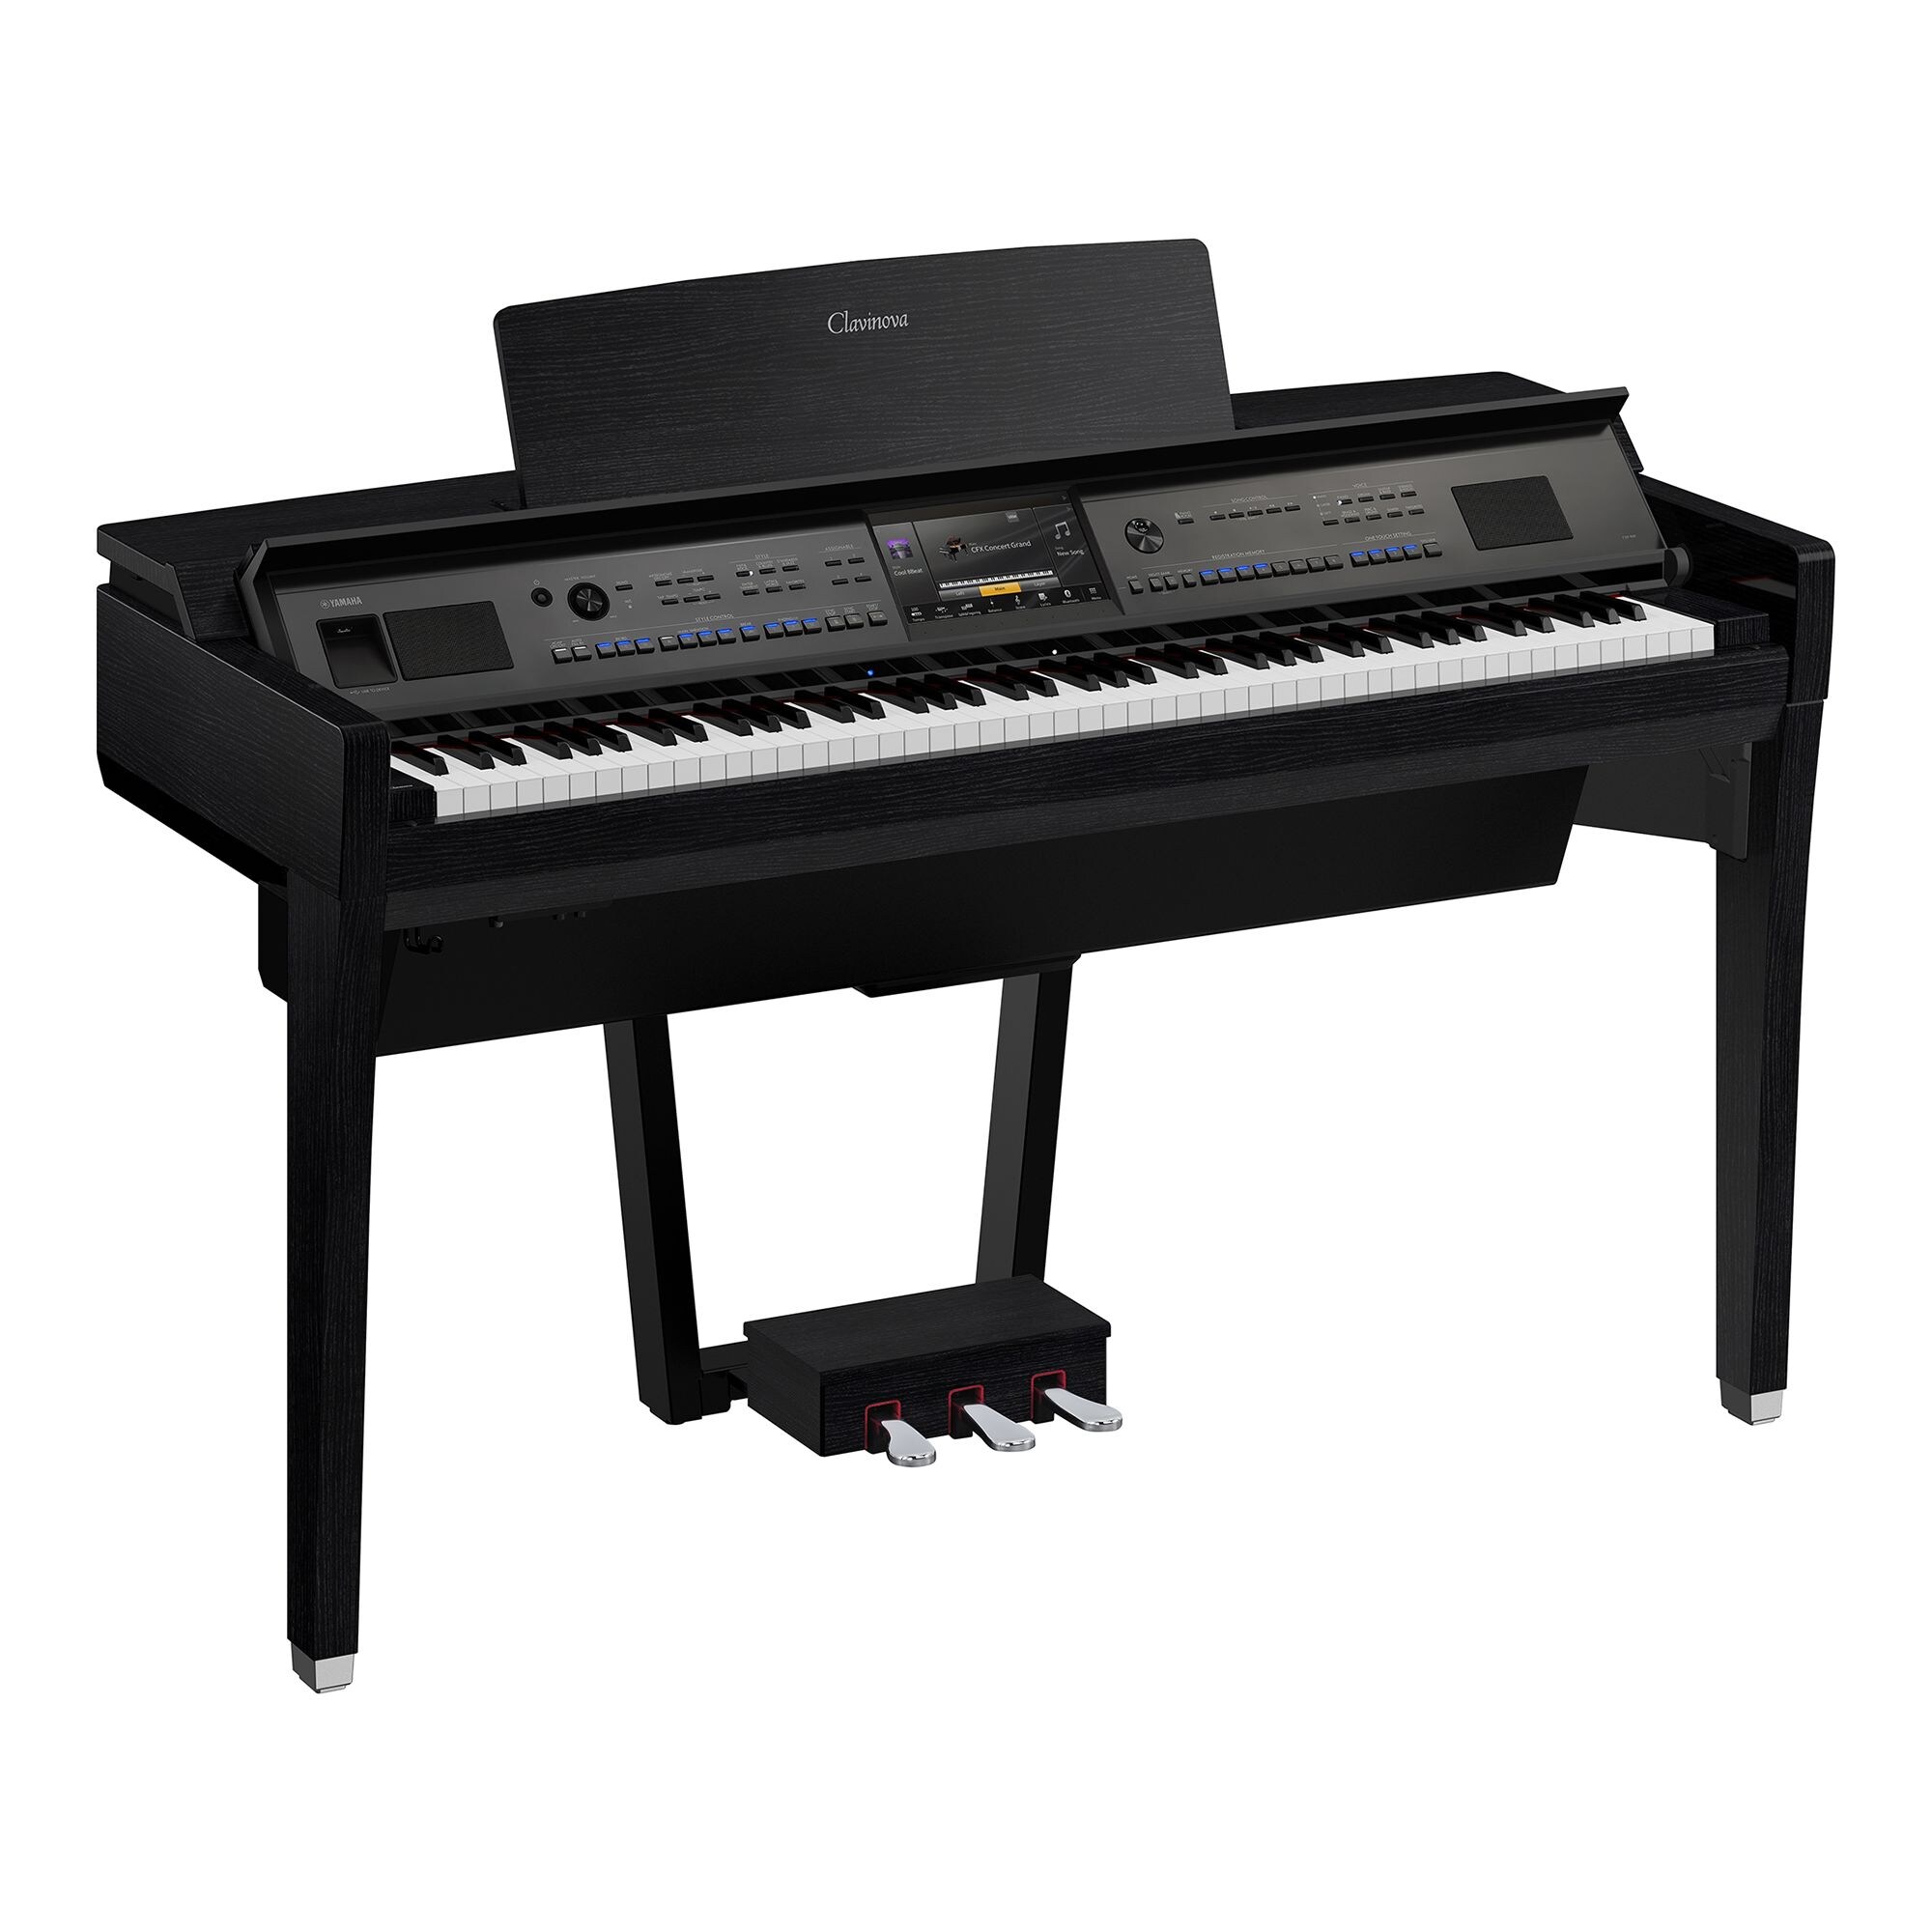 
Yamaha U2 Piano: A Comprehensive Guide to This Classic Model